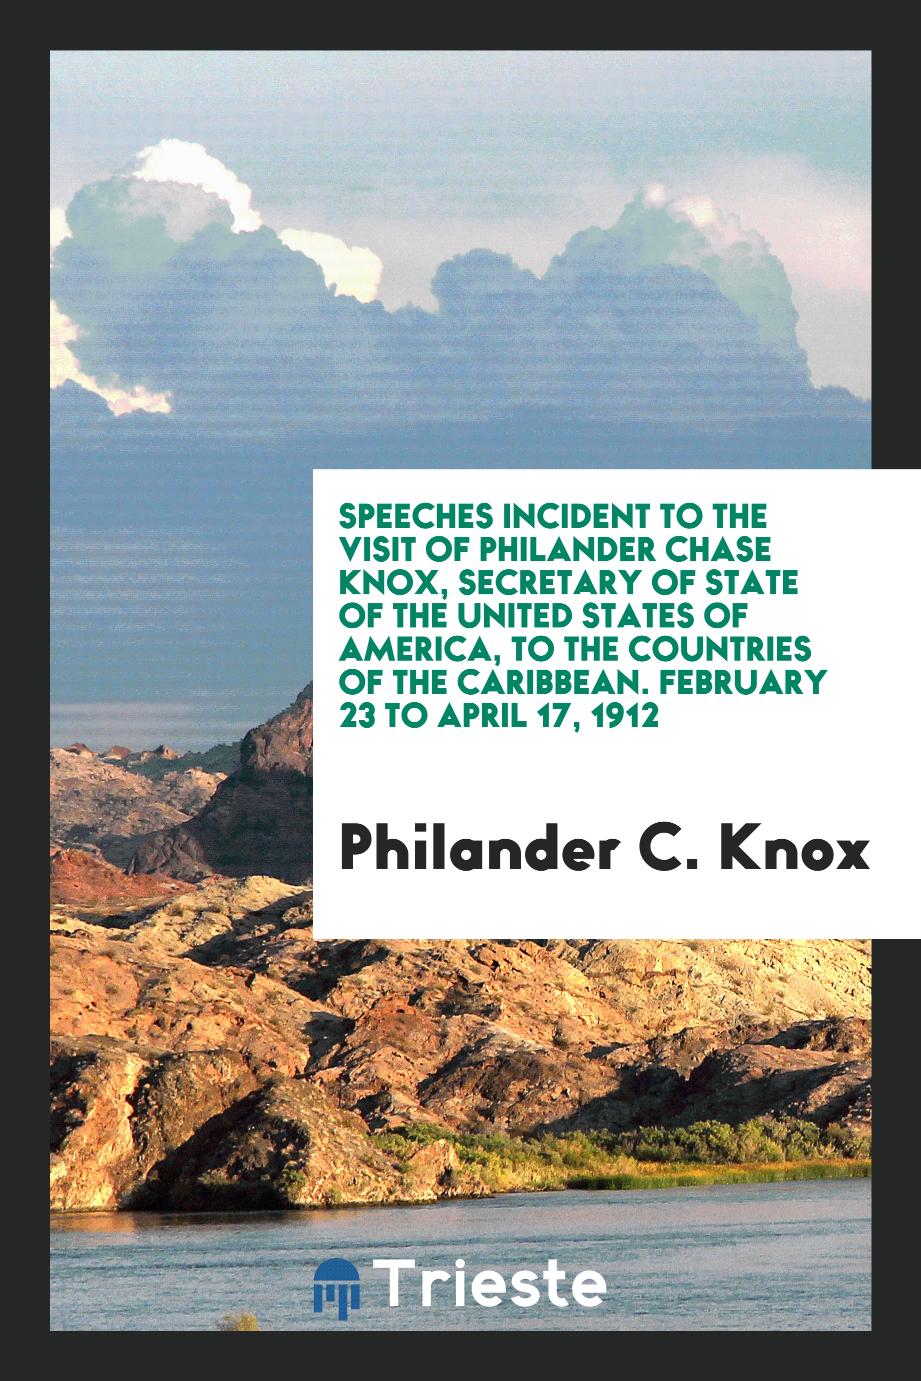 Speeches Incident to the Visit of Philander Chase Knox, Secretary of State of the United States of America, to the Countries of the Caribbean. February 23 to April 17, 1912